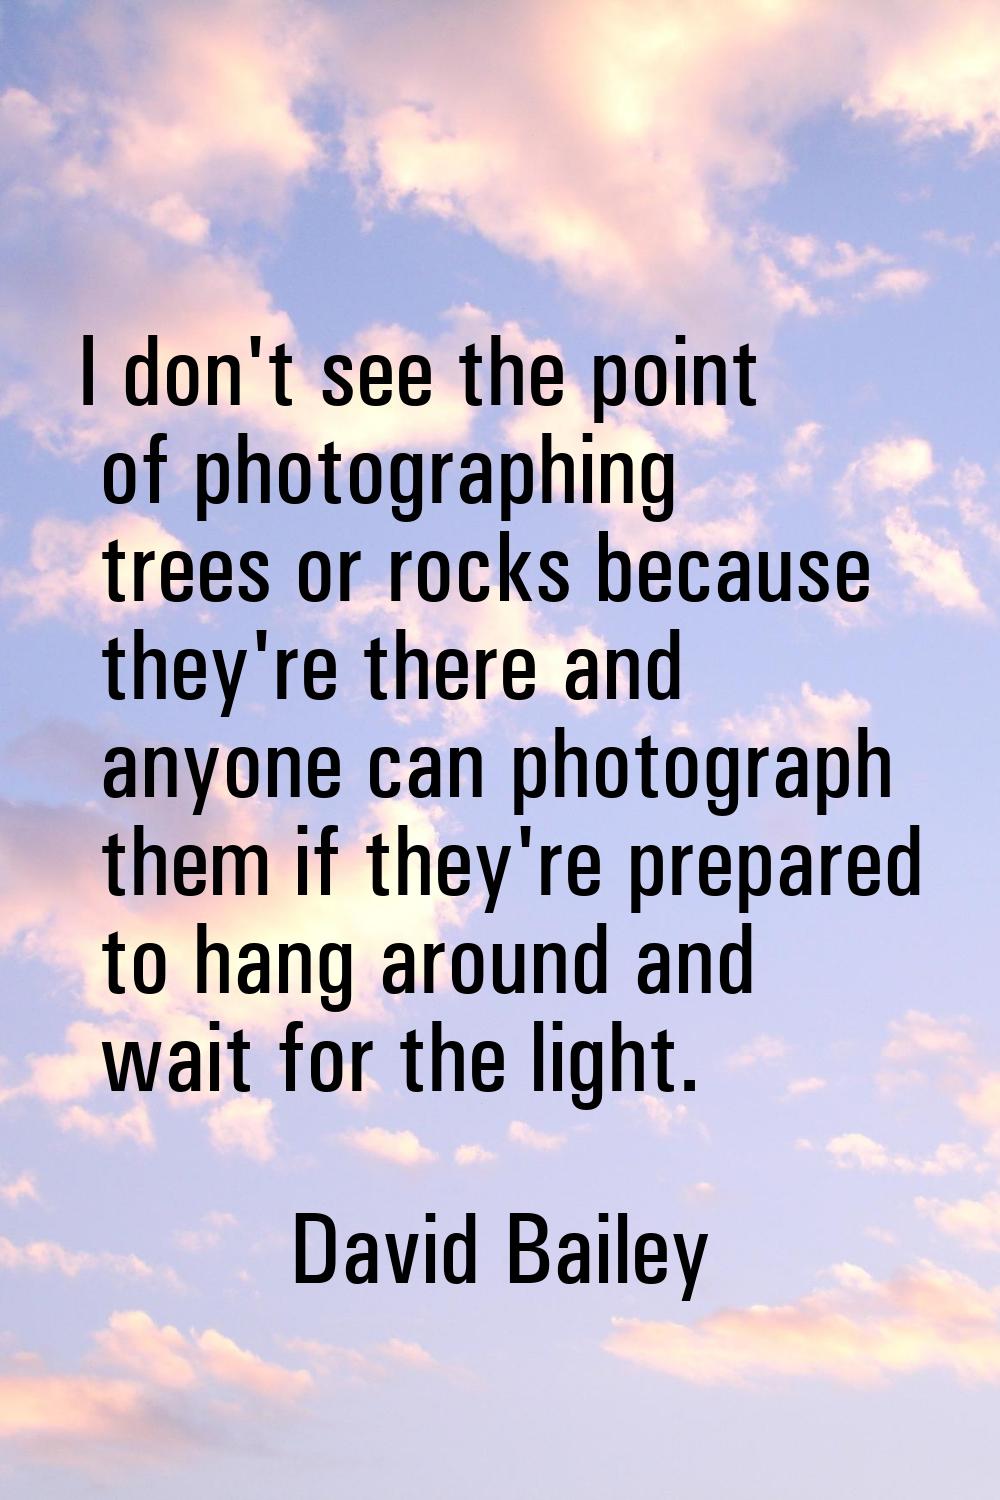 I don't see the point of photographing trees or rocks because they're there and anyone can photogra